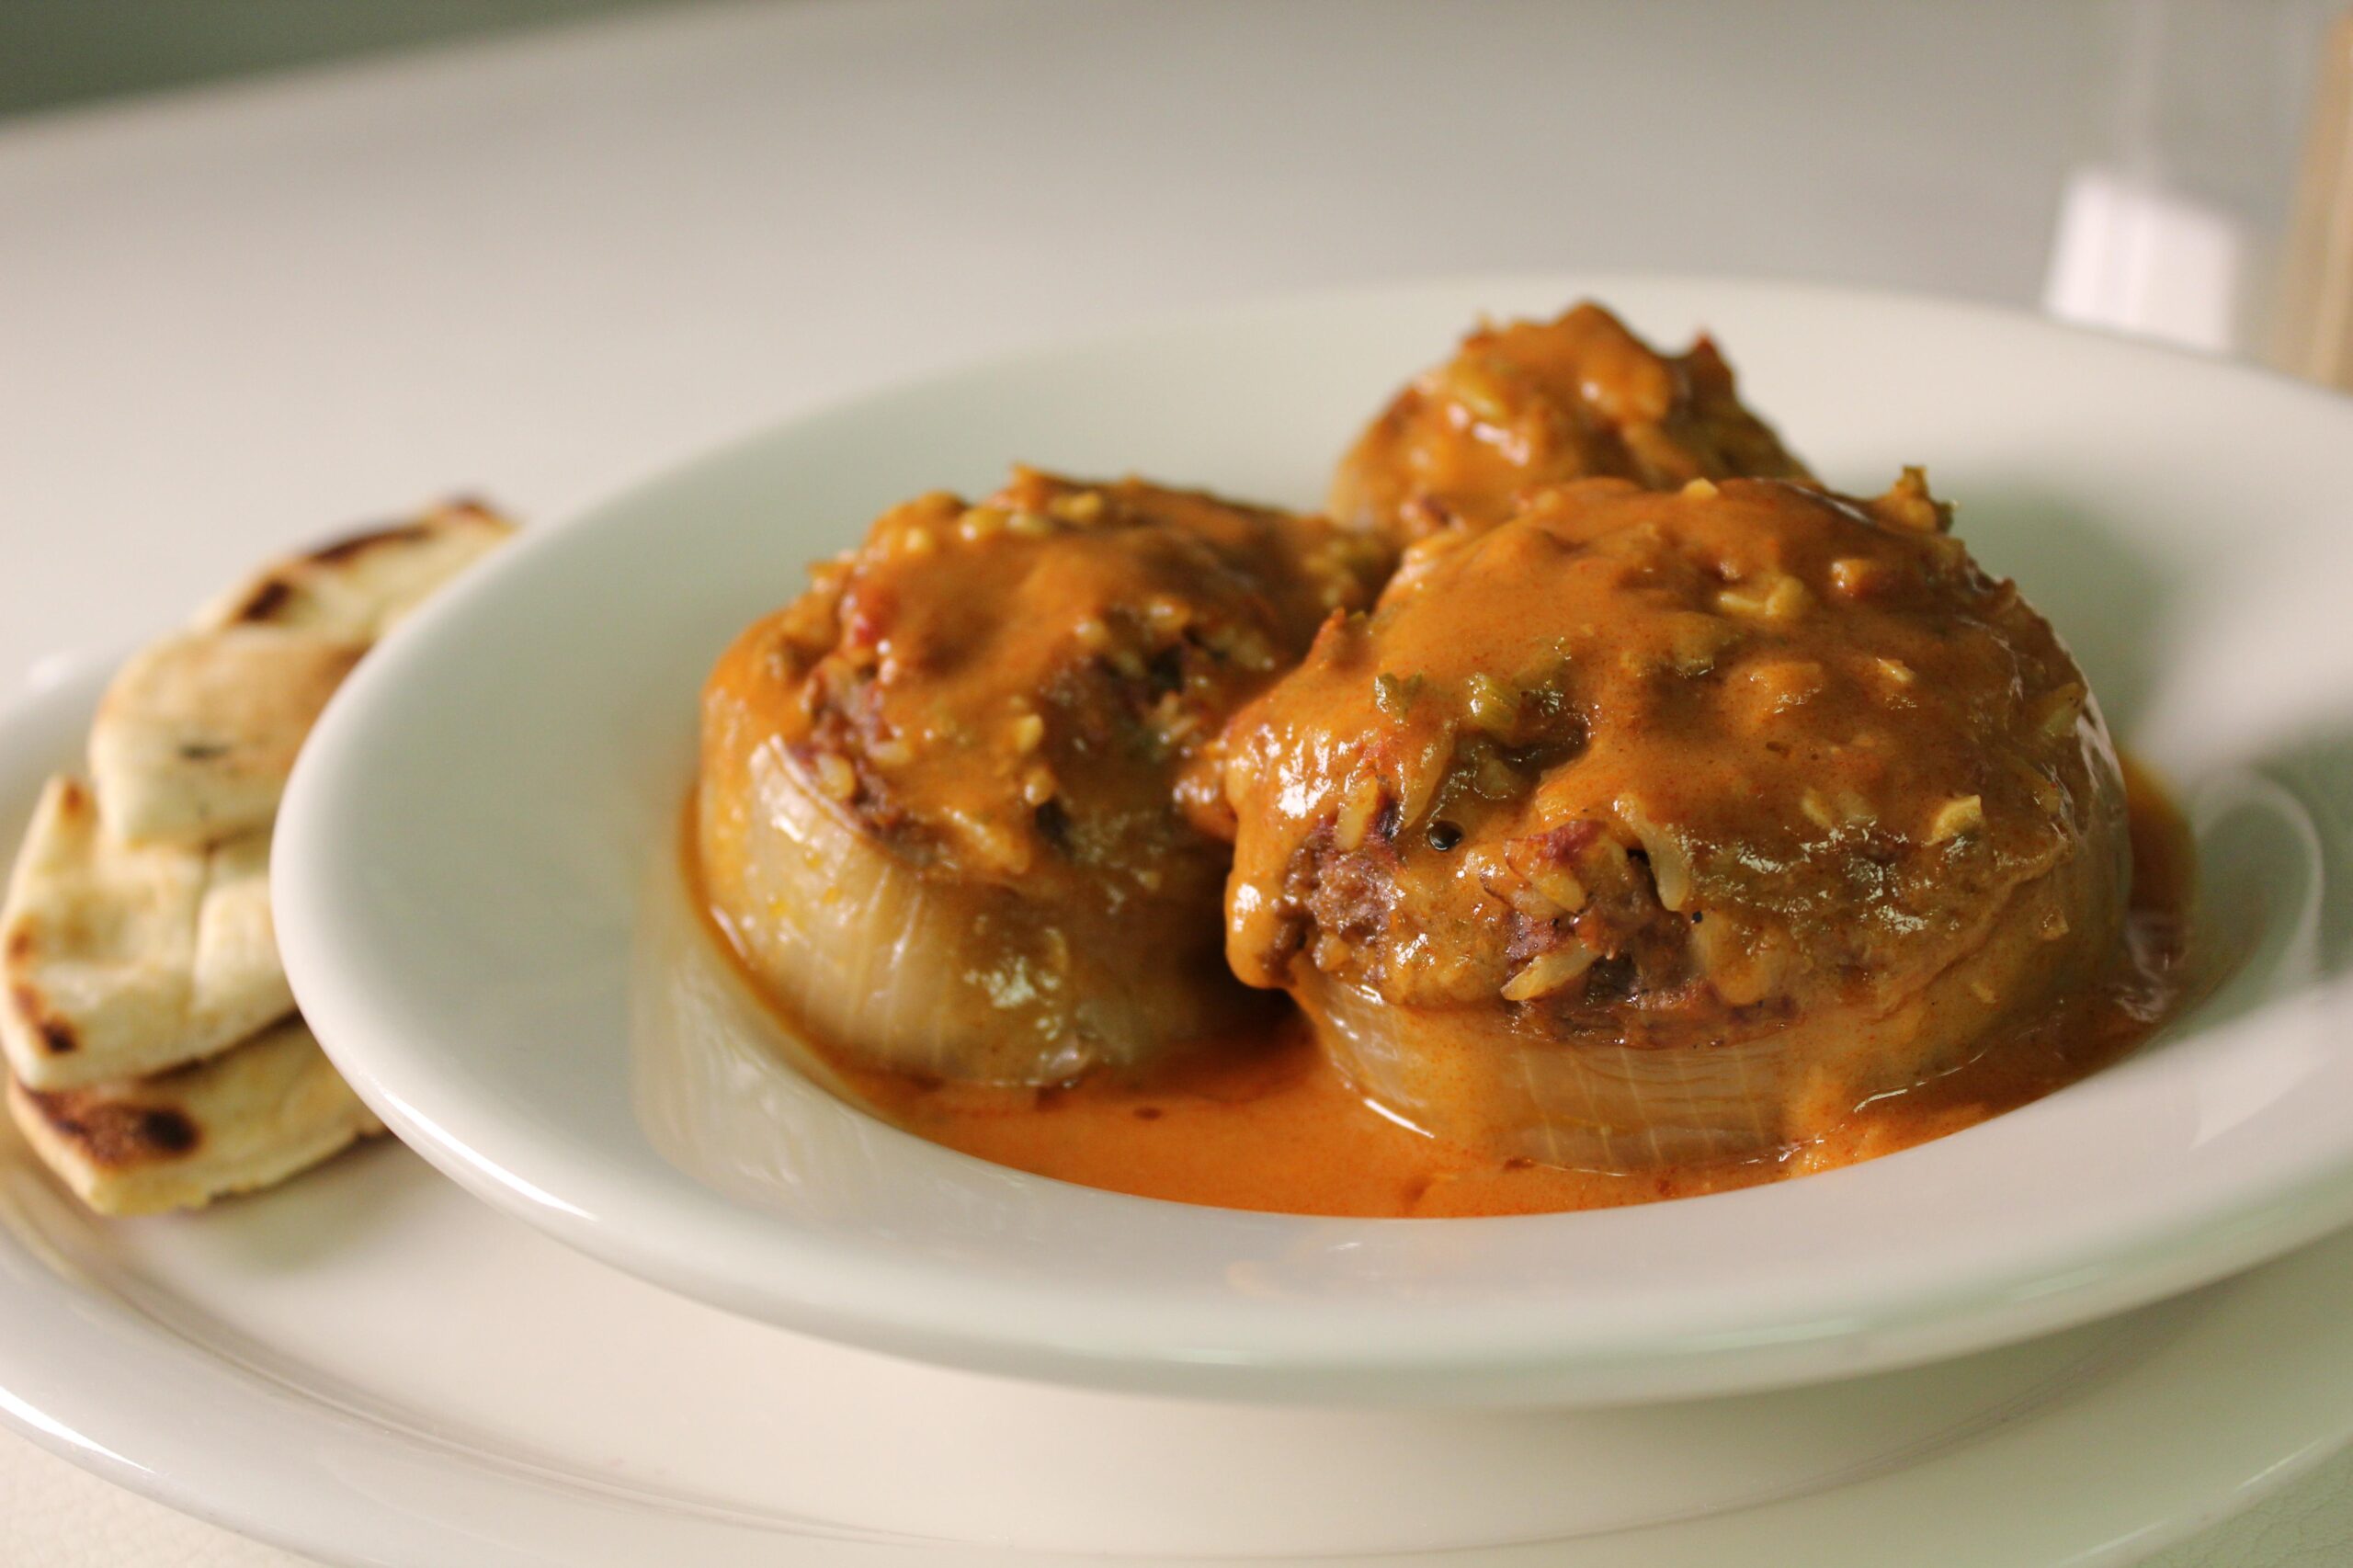 Delicious Stuffed Onion Recipe for a Flavorful Meal